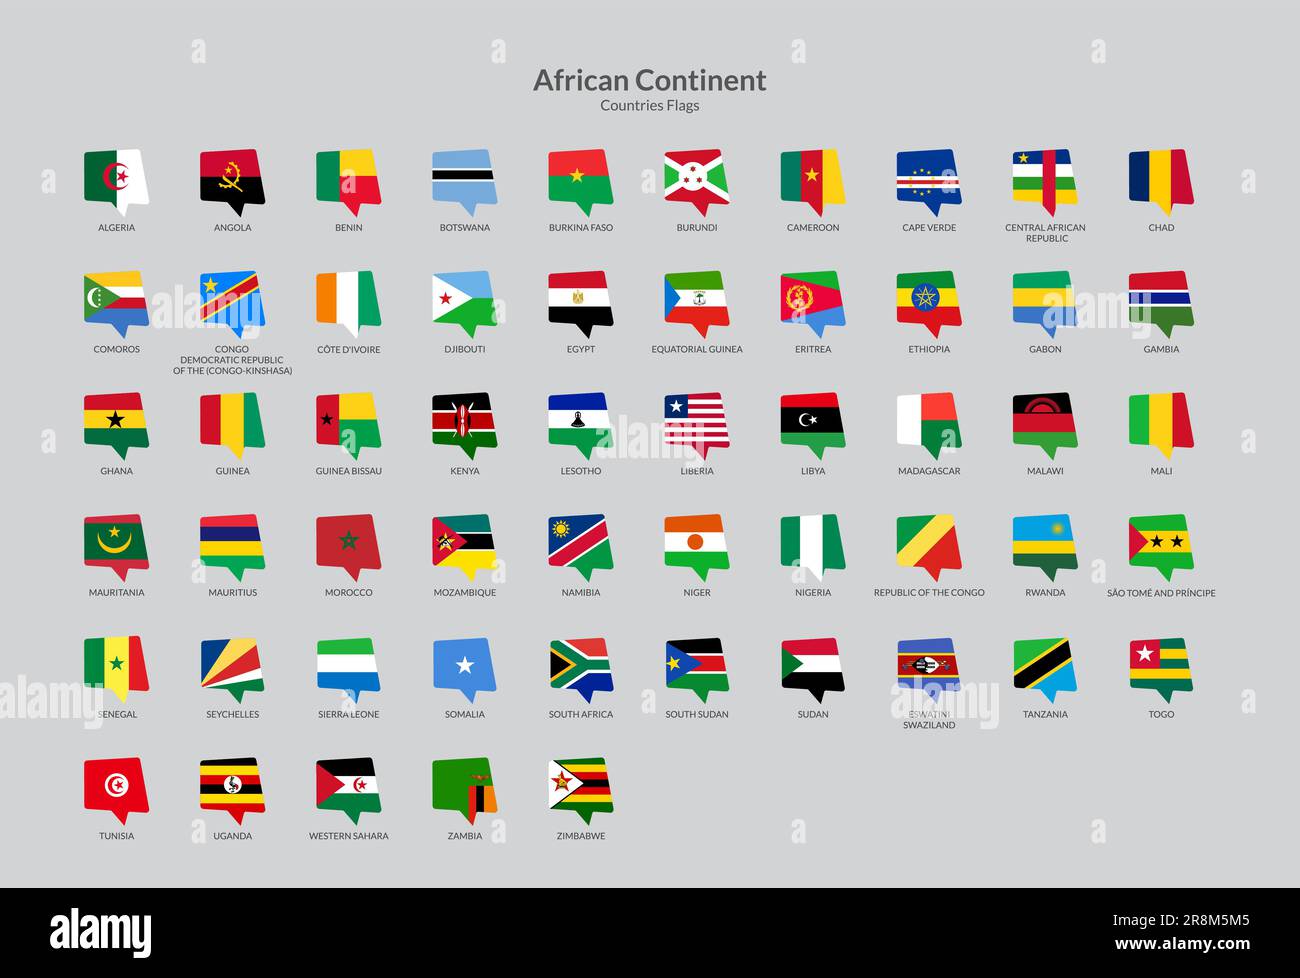 African Continent countries flag icons collection Stock Vector